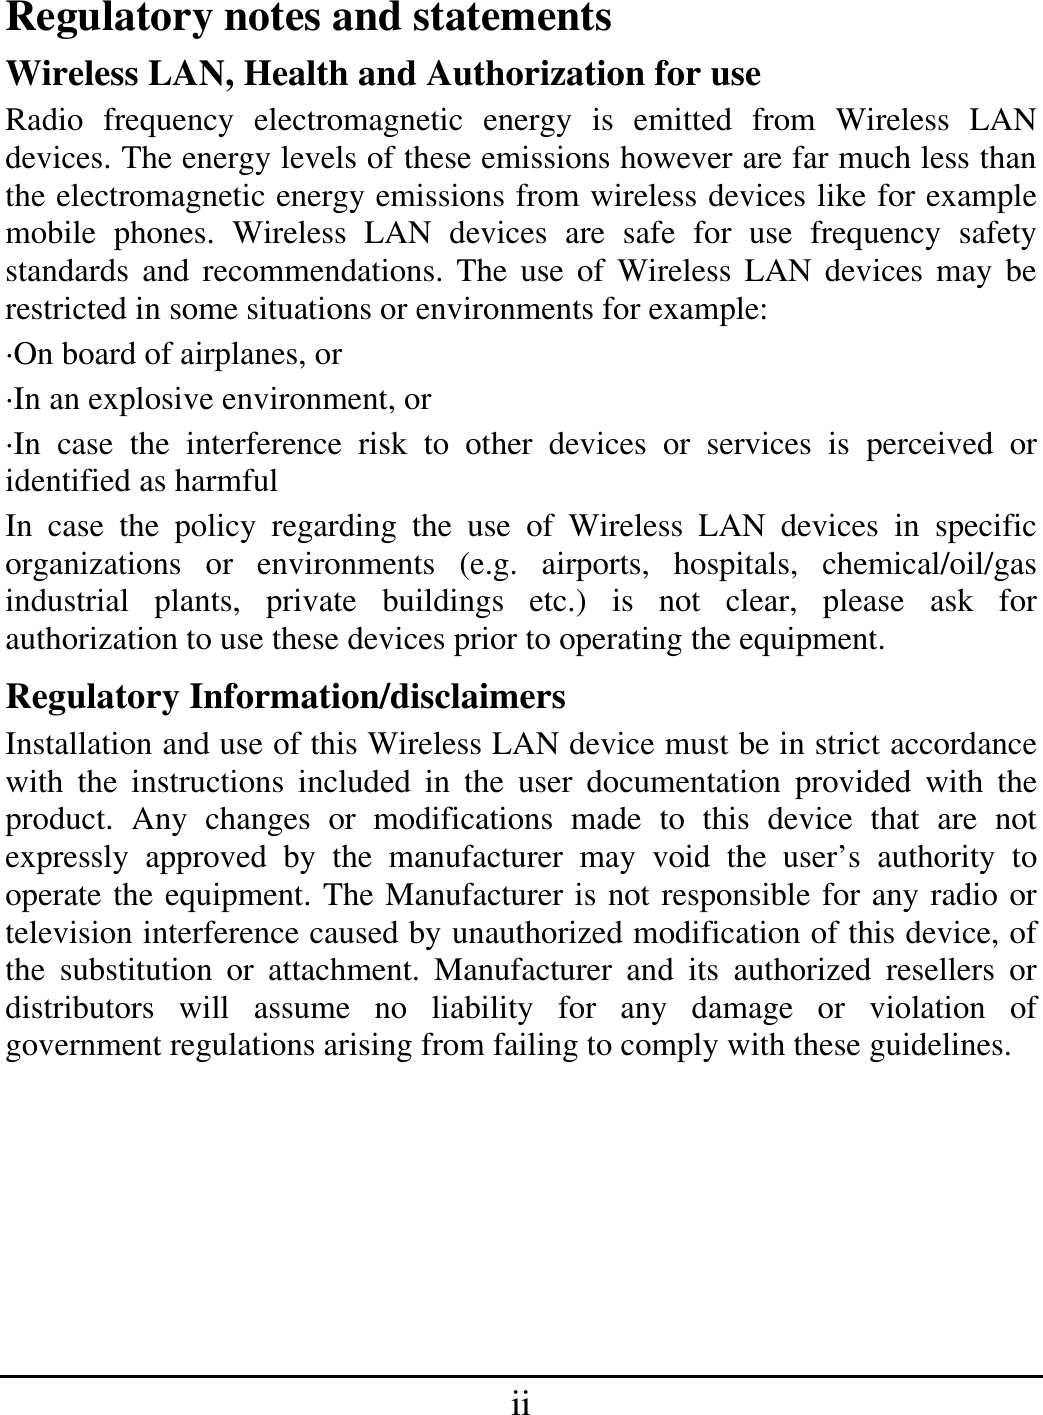 ii Regulatory notes and statements Wireless LAN, Health and Authorization for use Radio frequency electromagnetic energy is emitted from Wireless LAN devices. The energy levels of these emissions however are far much less than the electromagnetic energy emissions from wireless devices like for example mobile phones. Wireless LAN devices are safe for use frequency safety standards and recommendations. The use of Wireless LAN devices may be restricted in some situations or environments for example: ·On board of airplanes, or ·In an explosive environment, or ·In case the interference risk to other devices or services is perceived or identified as harmful In case the policy regarding the use of Wireless LAN devices in specific organizations or environments (e.g. airports, hospitals, chemical/oil/gas industrial plants, private buildings etc.) is not clear, please ask for authorization to use these devices prior to operating the equipment. Regulatory Information/disclaimers Installation and use of this Wireless LAN device must be in strict accordance with the instructions included in the user documentation provided with the product. Any changes or modifications made to this device that are not expressly approved by the manufacturer may void the user’s authority to operate the equipment. The Manufacturer is not responsible for any radio or television interference caused by unauthorized modification of this device, of the substitution or attachment. Manufacturer and its authorized resellers or distributors will assume no liability for any damage or violation of government regulations arising from failing to comply with these guidelines.      